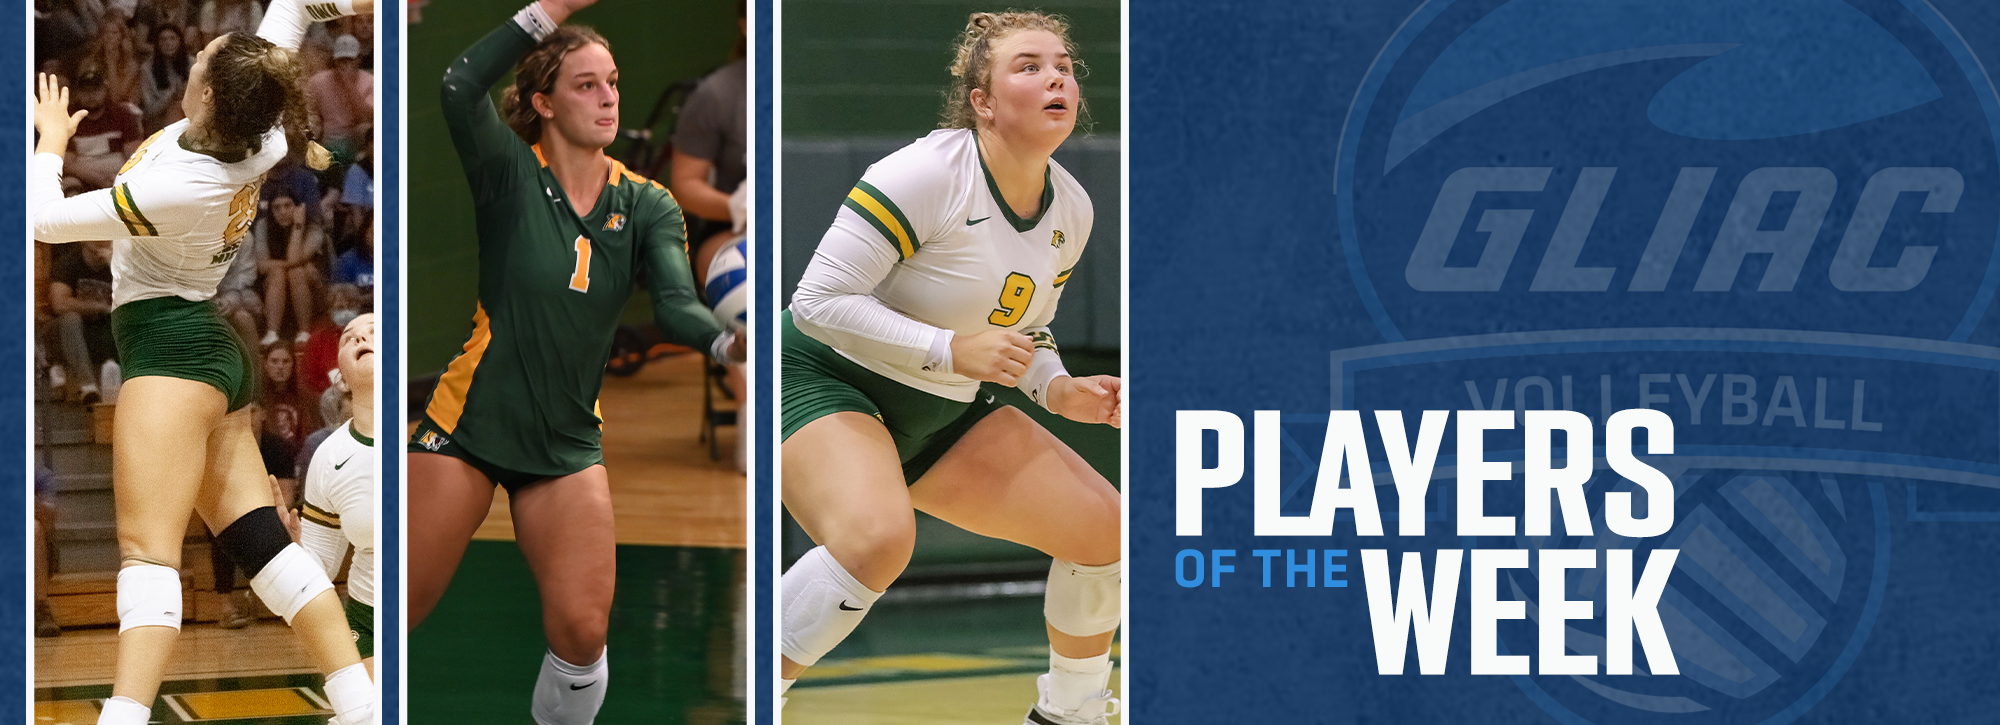 NMU's Meyer, Yacko and Van Remortel honored with GLIAC Volleyball weekly awards